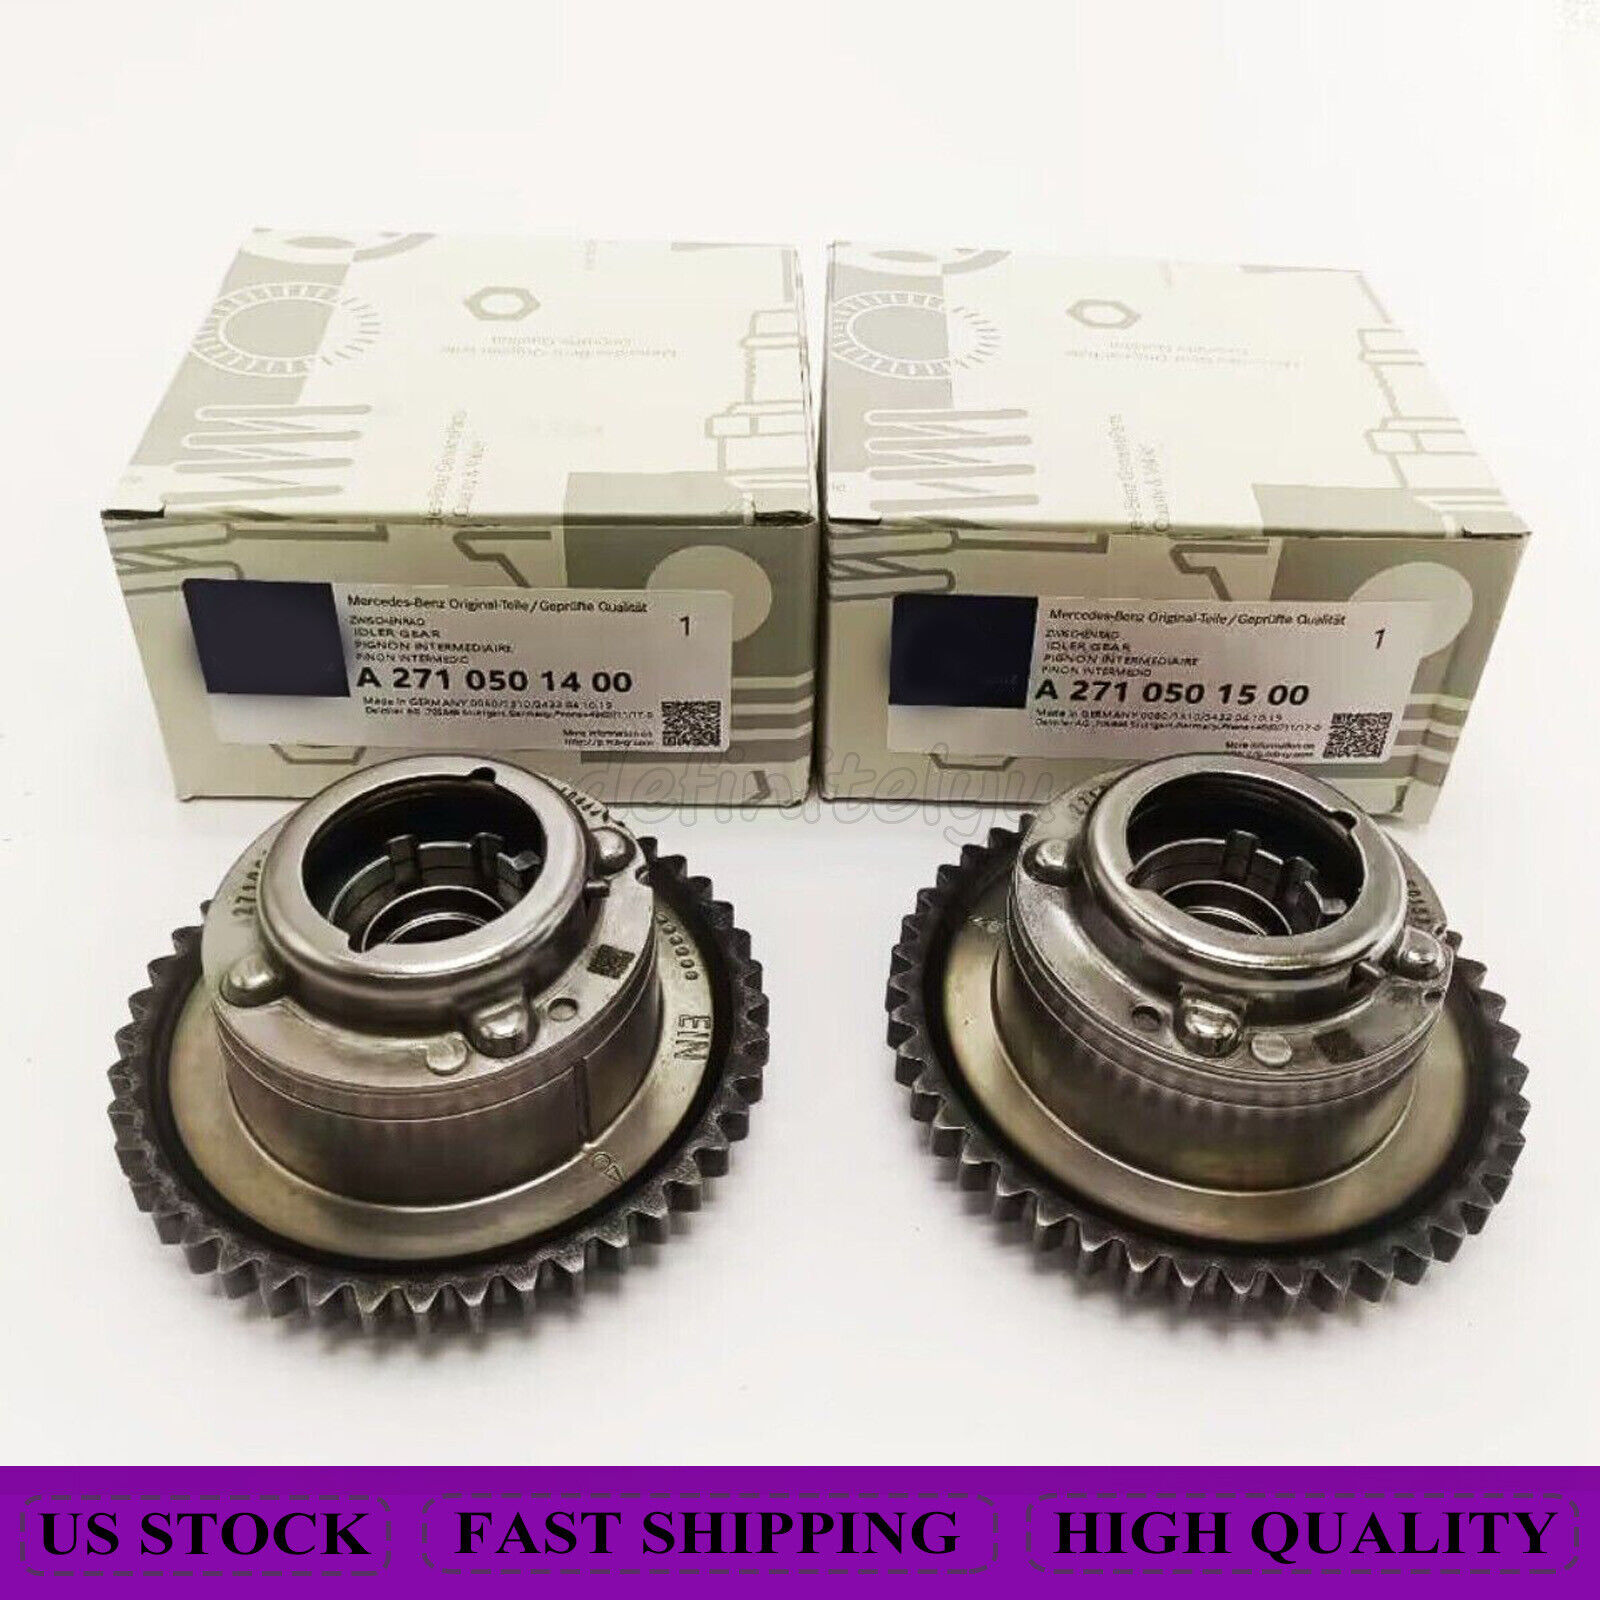  2X INA Intake&Exhaust Camshaft Adjuster VVT For Mercedes-Benz M271 W204 W212 US